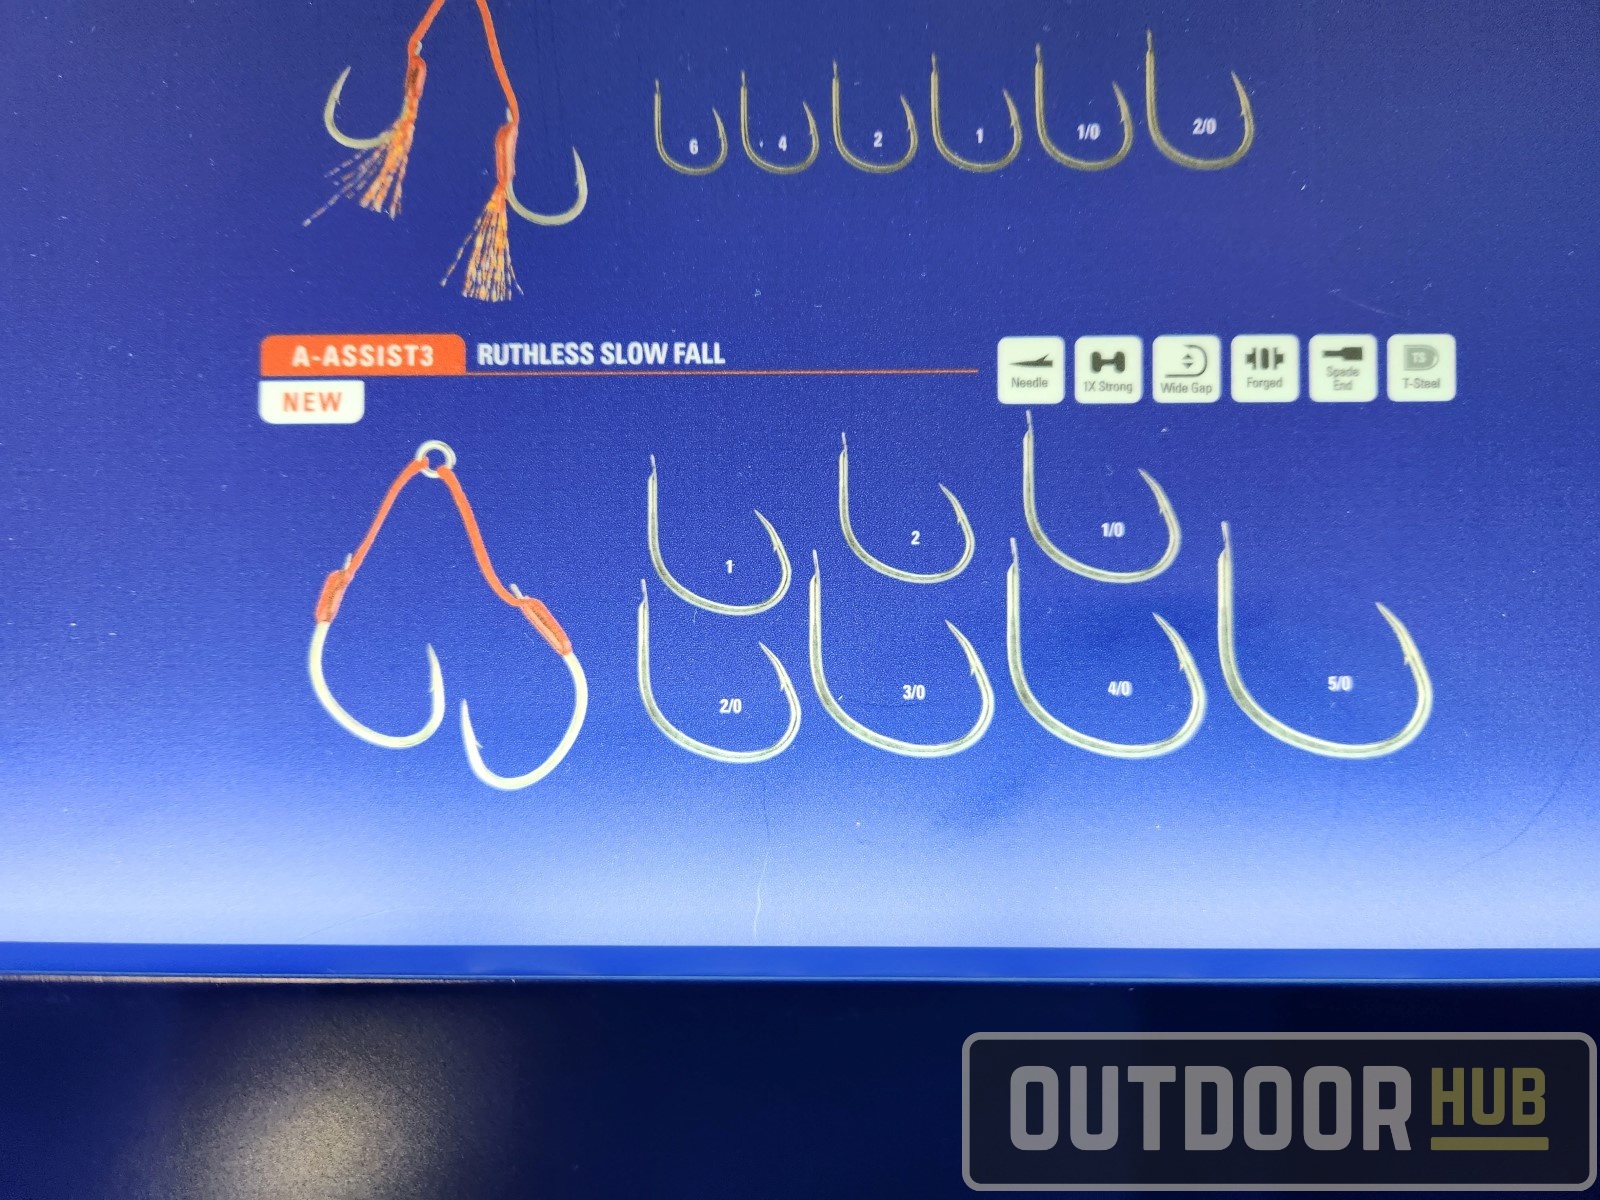 [ICAST 2023] Mustad’s NEW AlphaPoint 4.8 Hooks